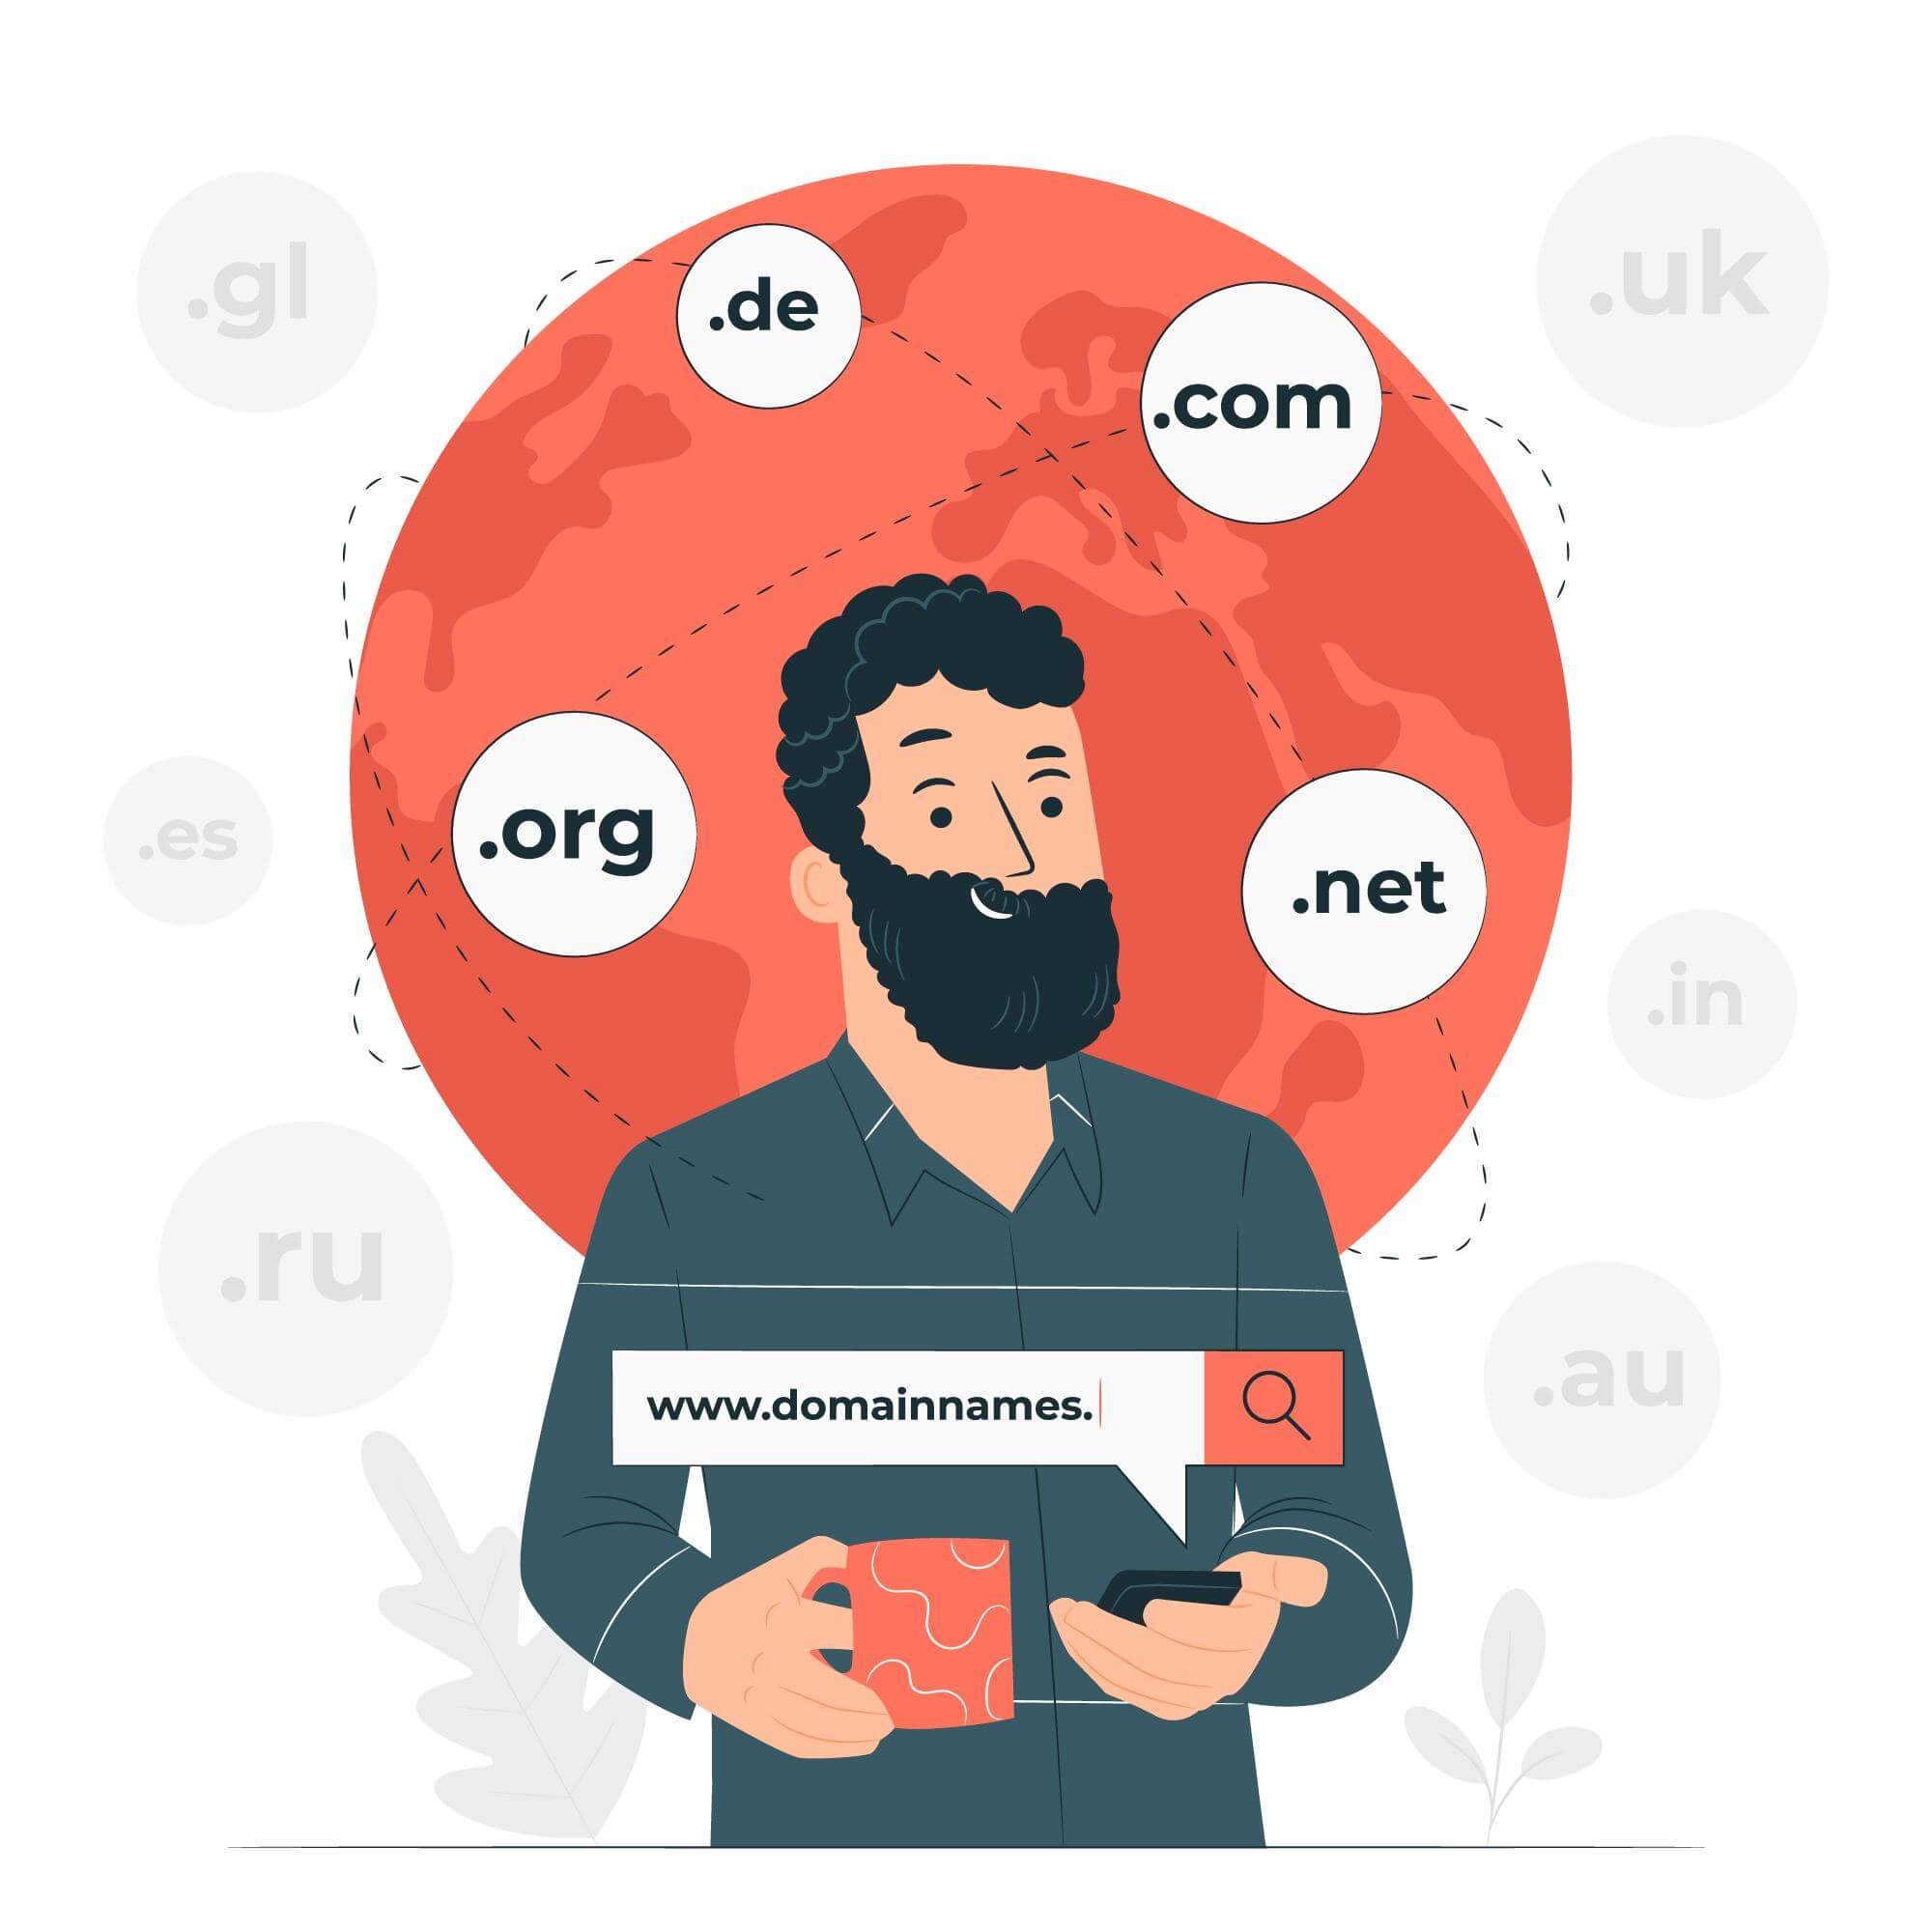 How to Register a Domain Name in 4 Steps 